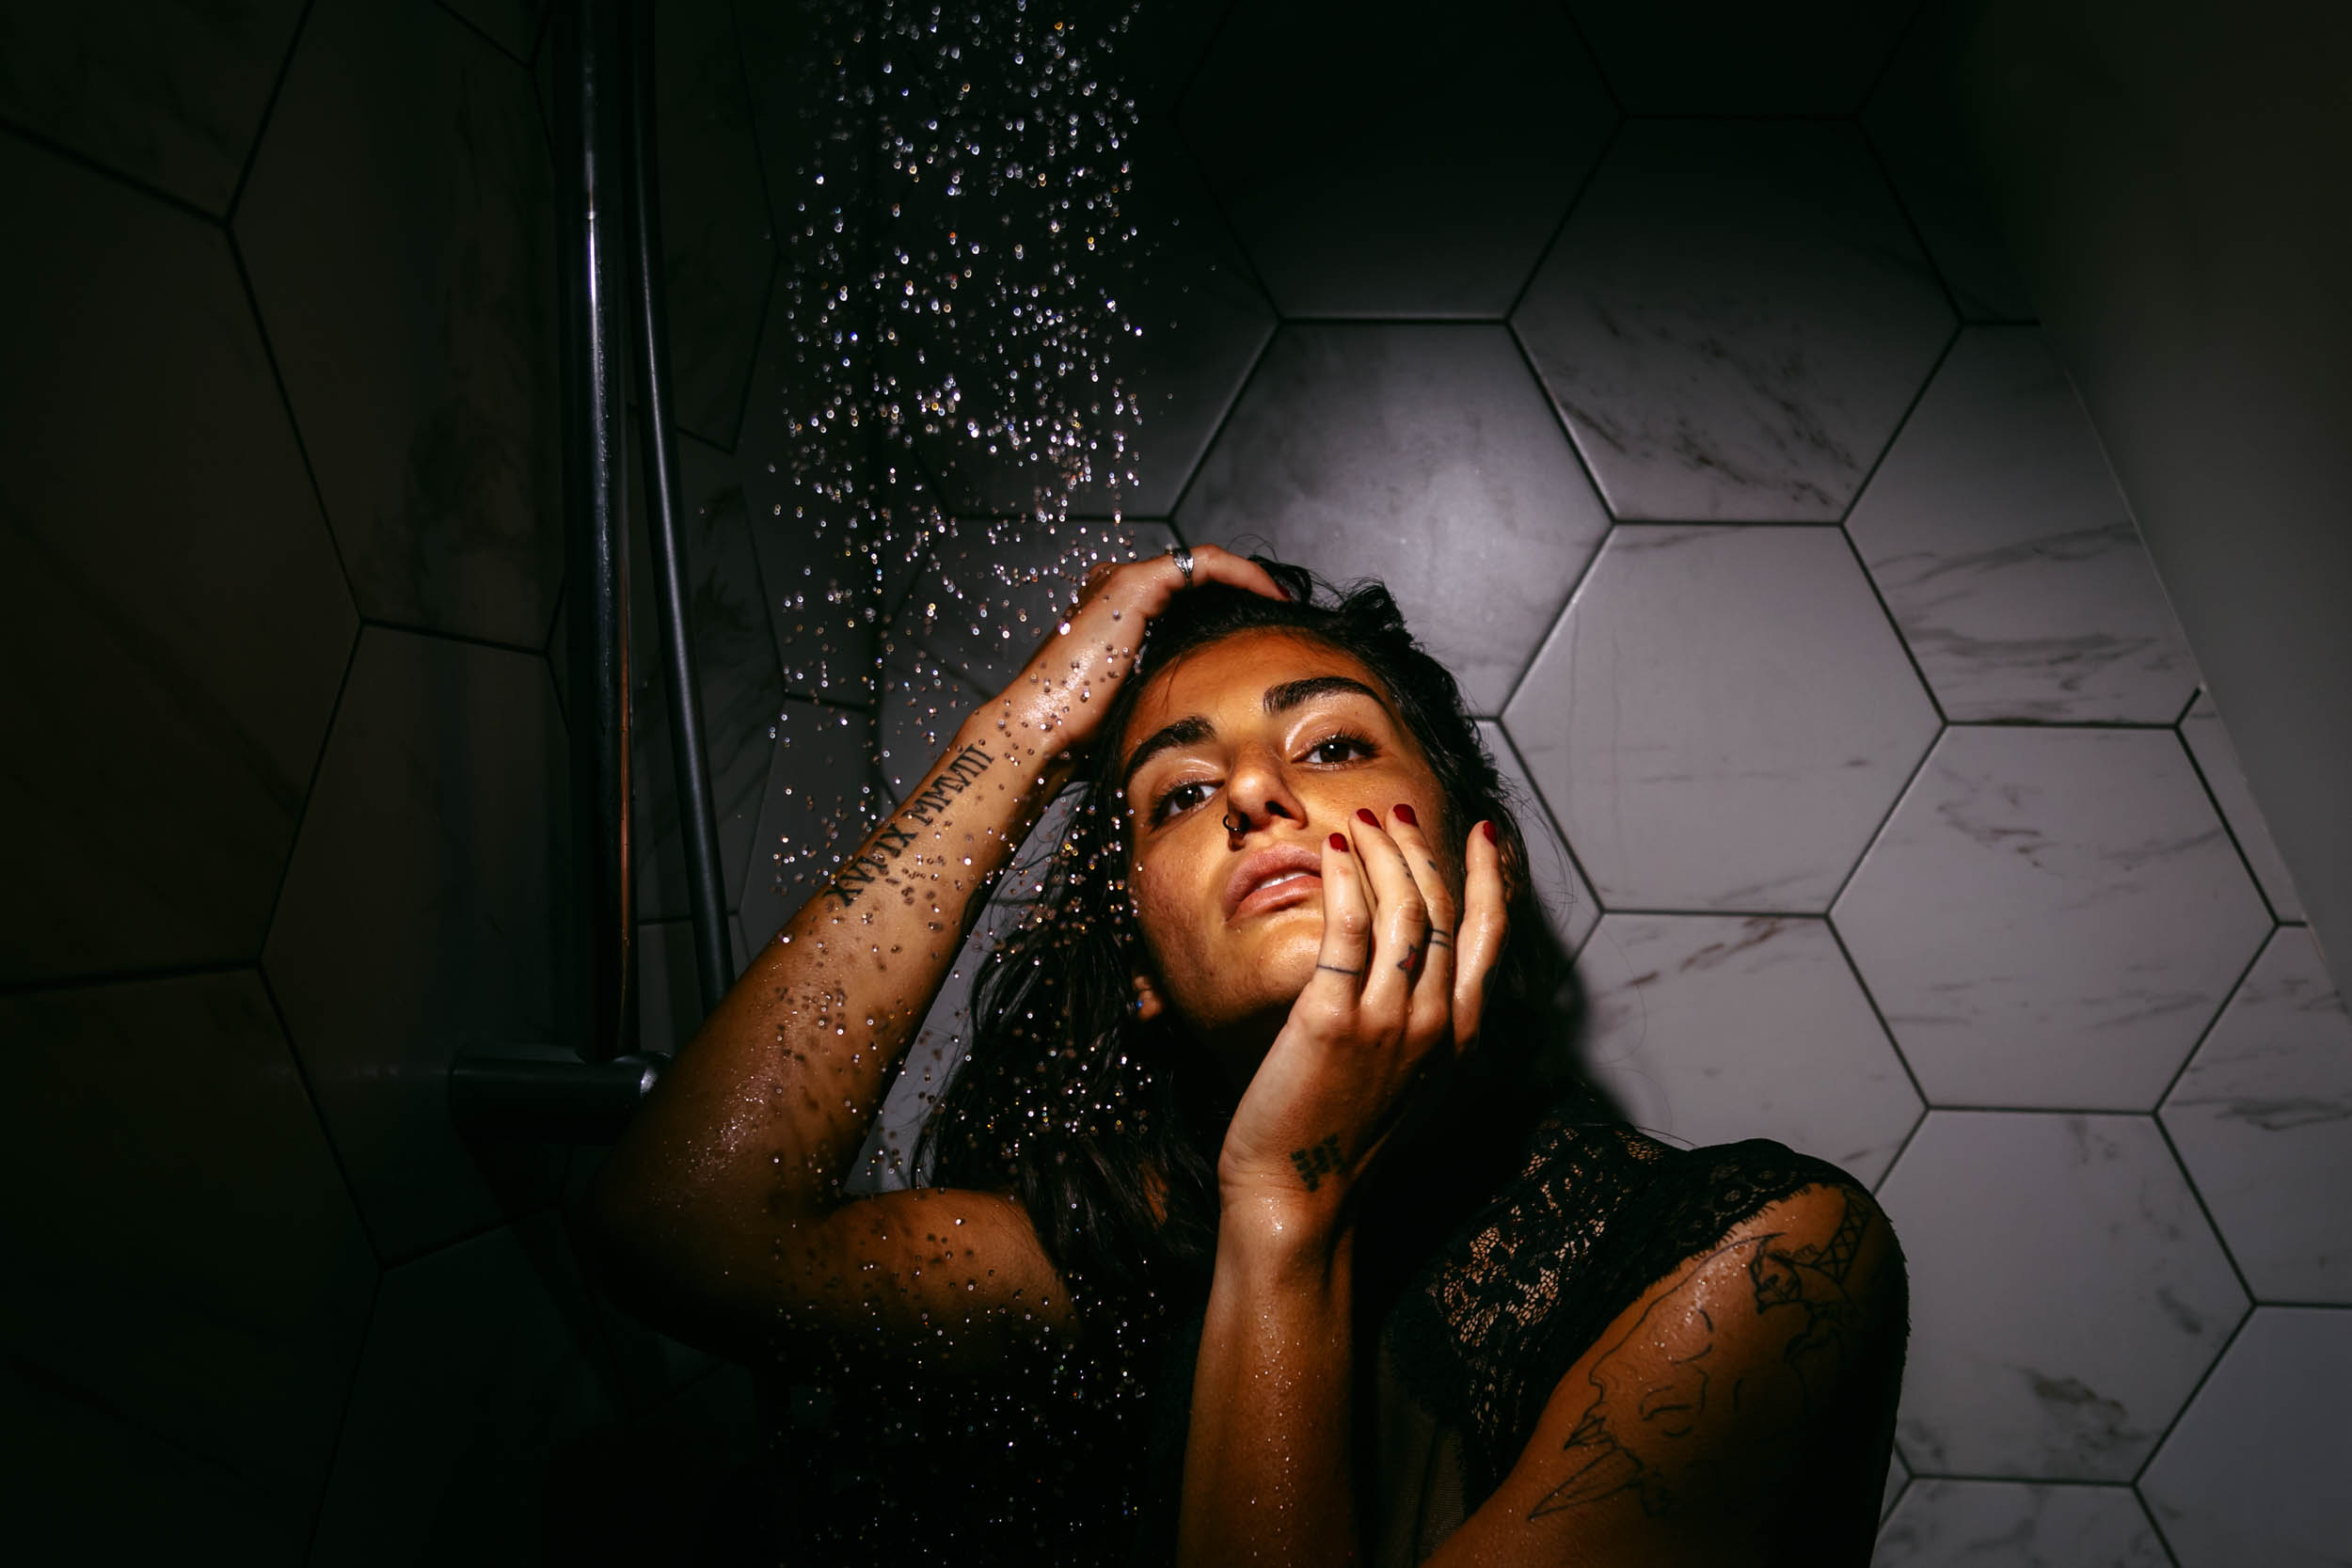 A woman stands under a shower during a beach photo shoot, with her hand on her face.